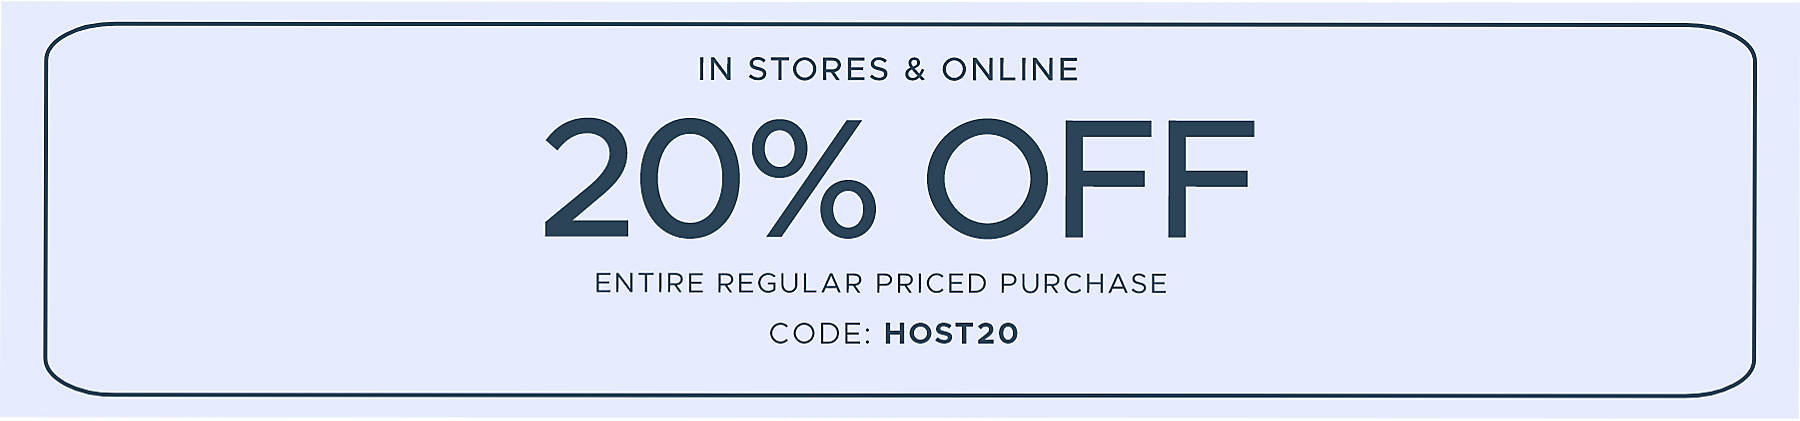 In Stores & Online 20% off entire regular priced purchase code: HOST20